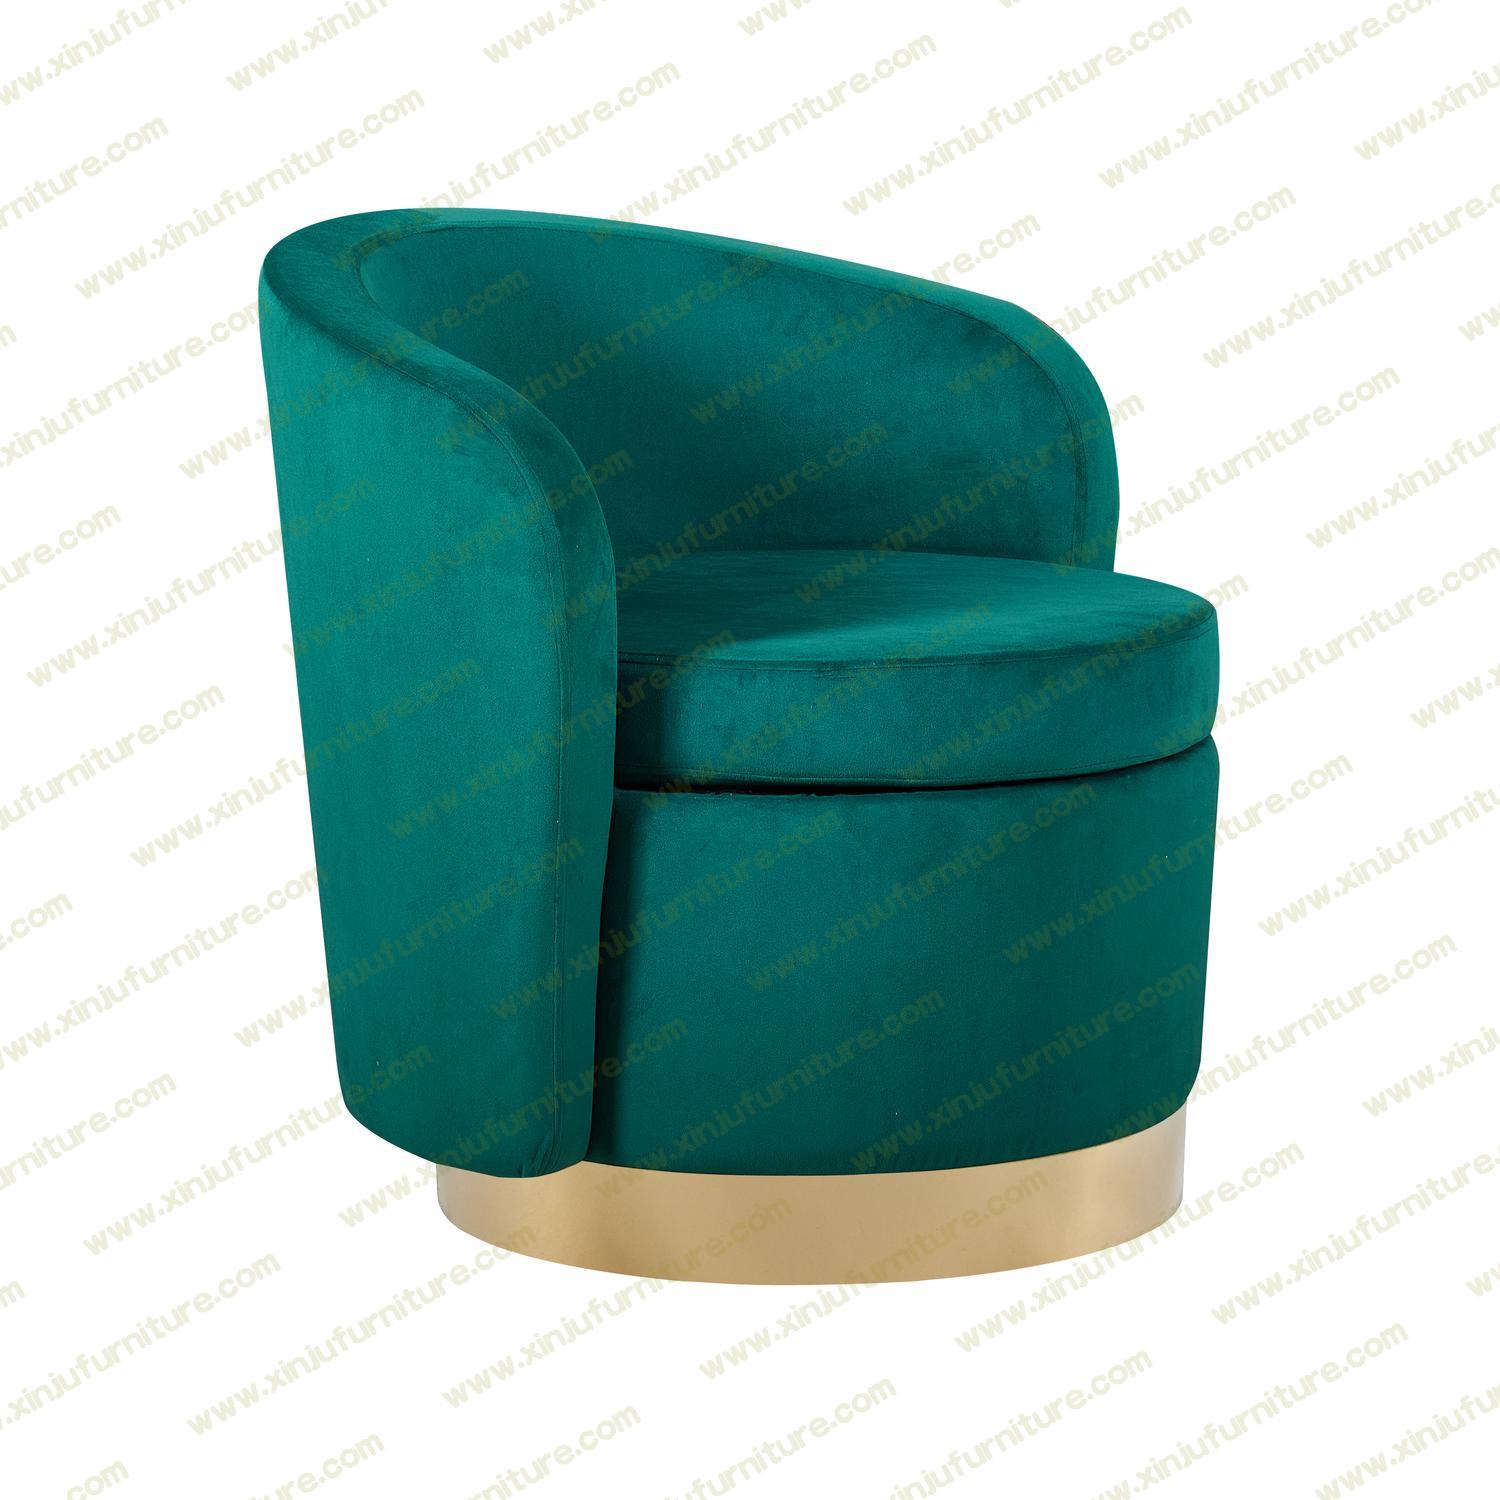 Durable and beautiful Ottoman chair